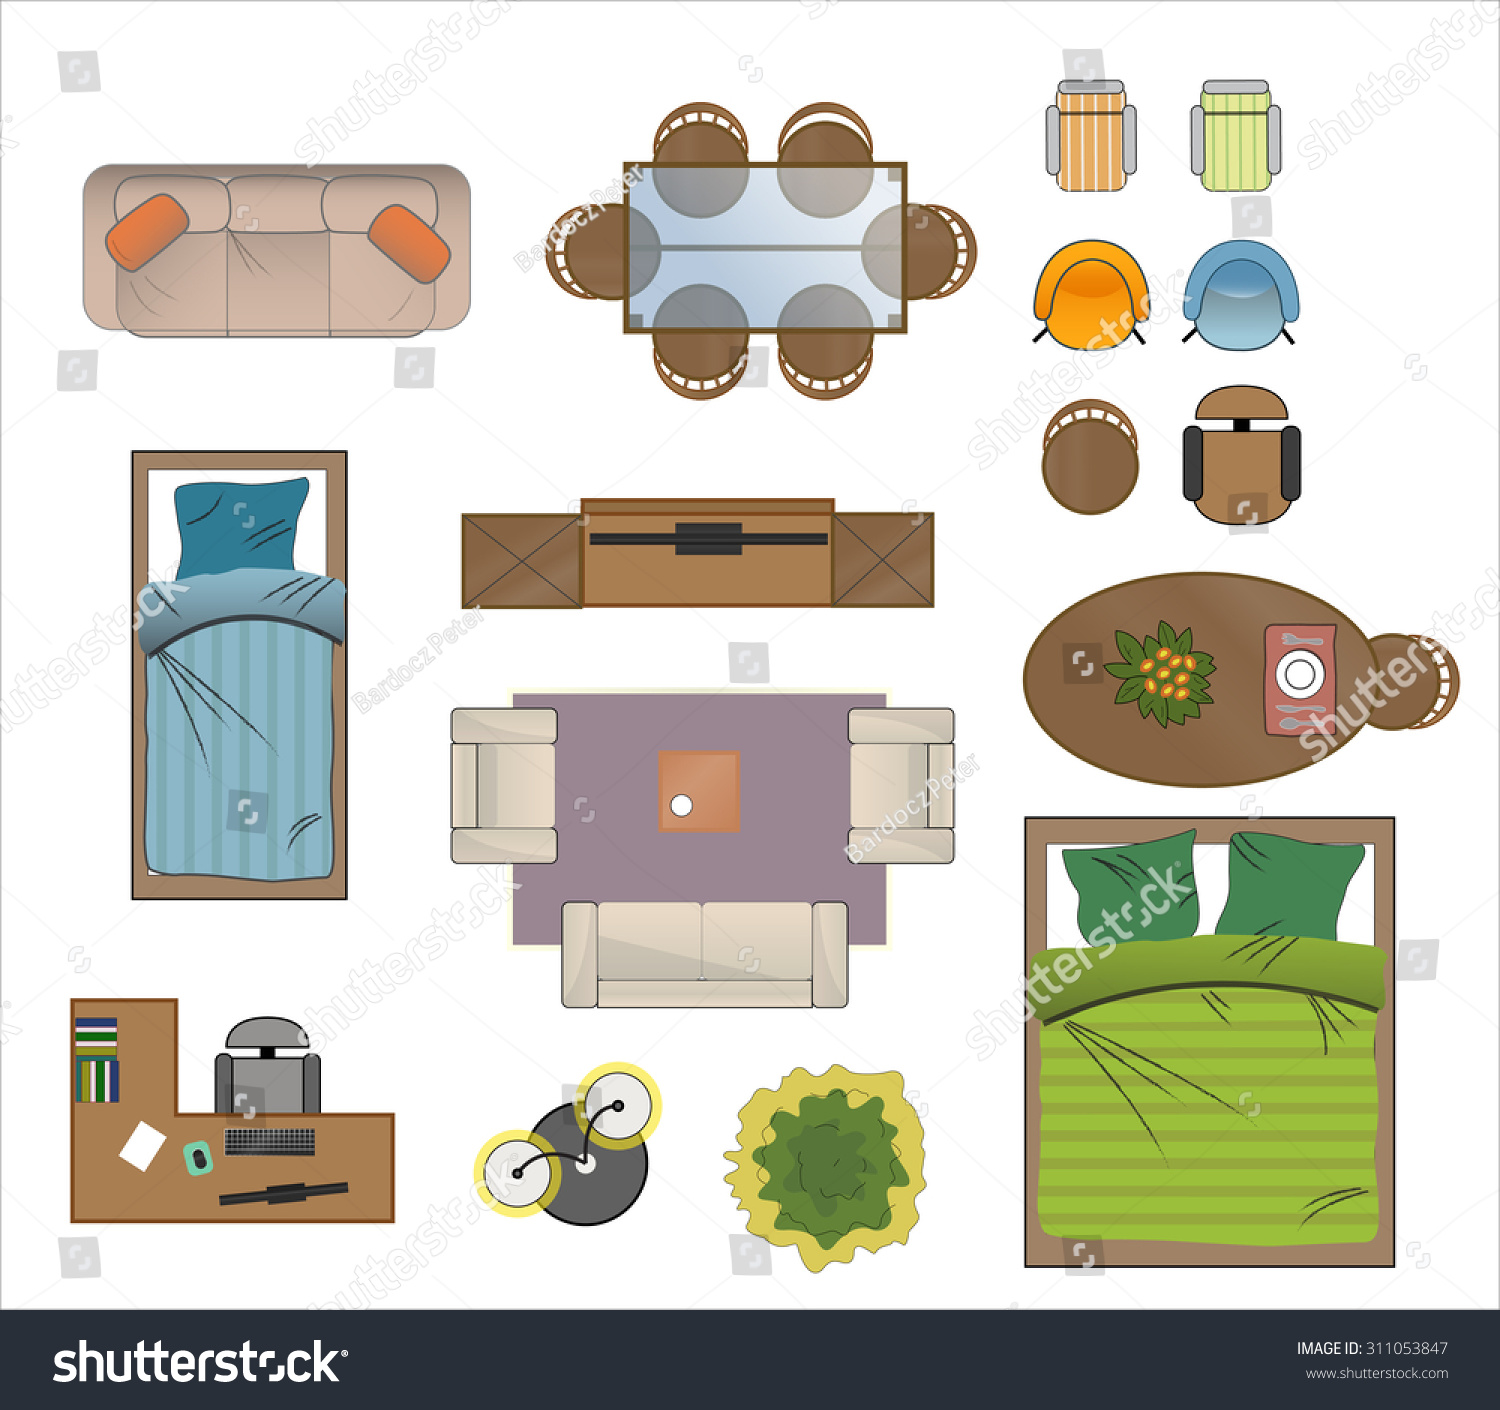 furniture clipart for floor plans - photo #48